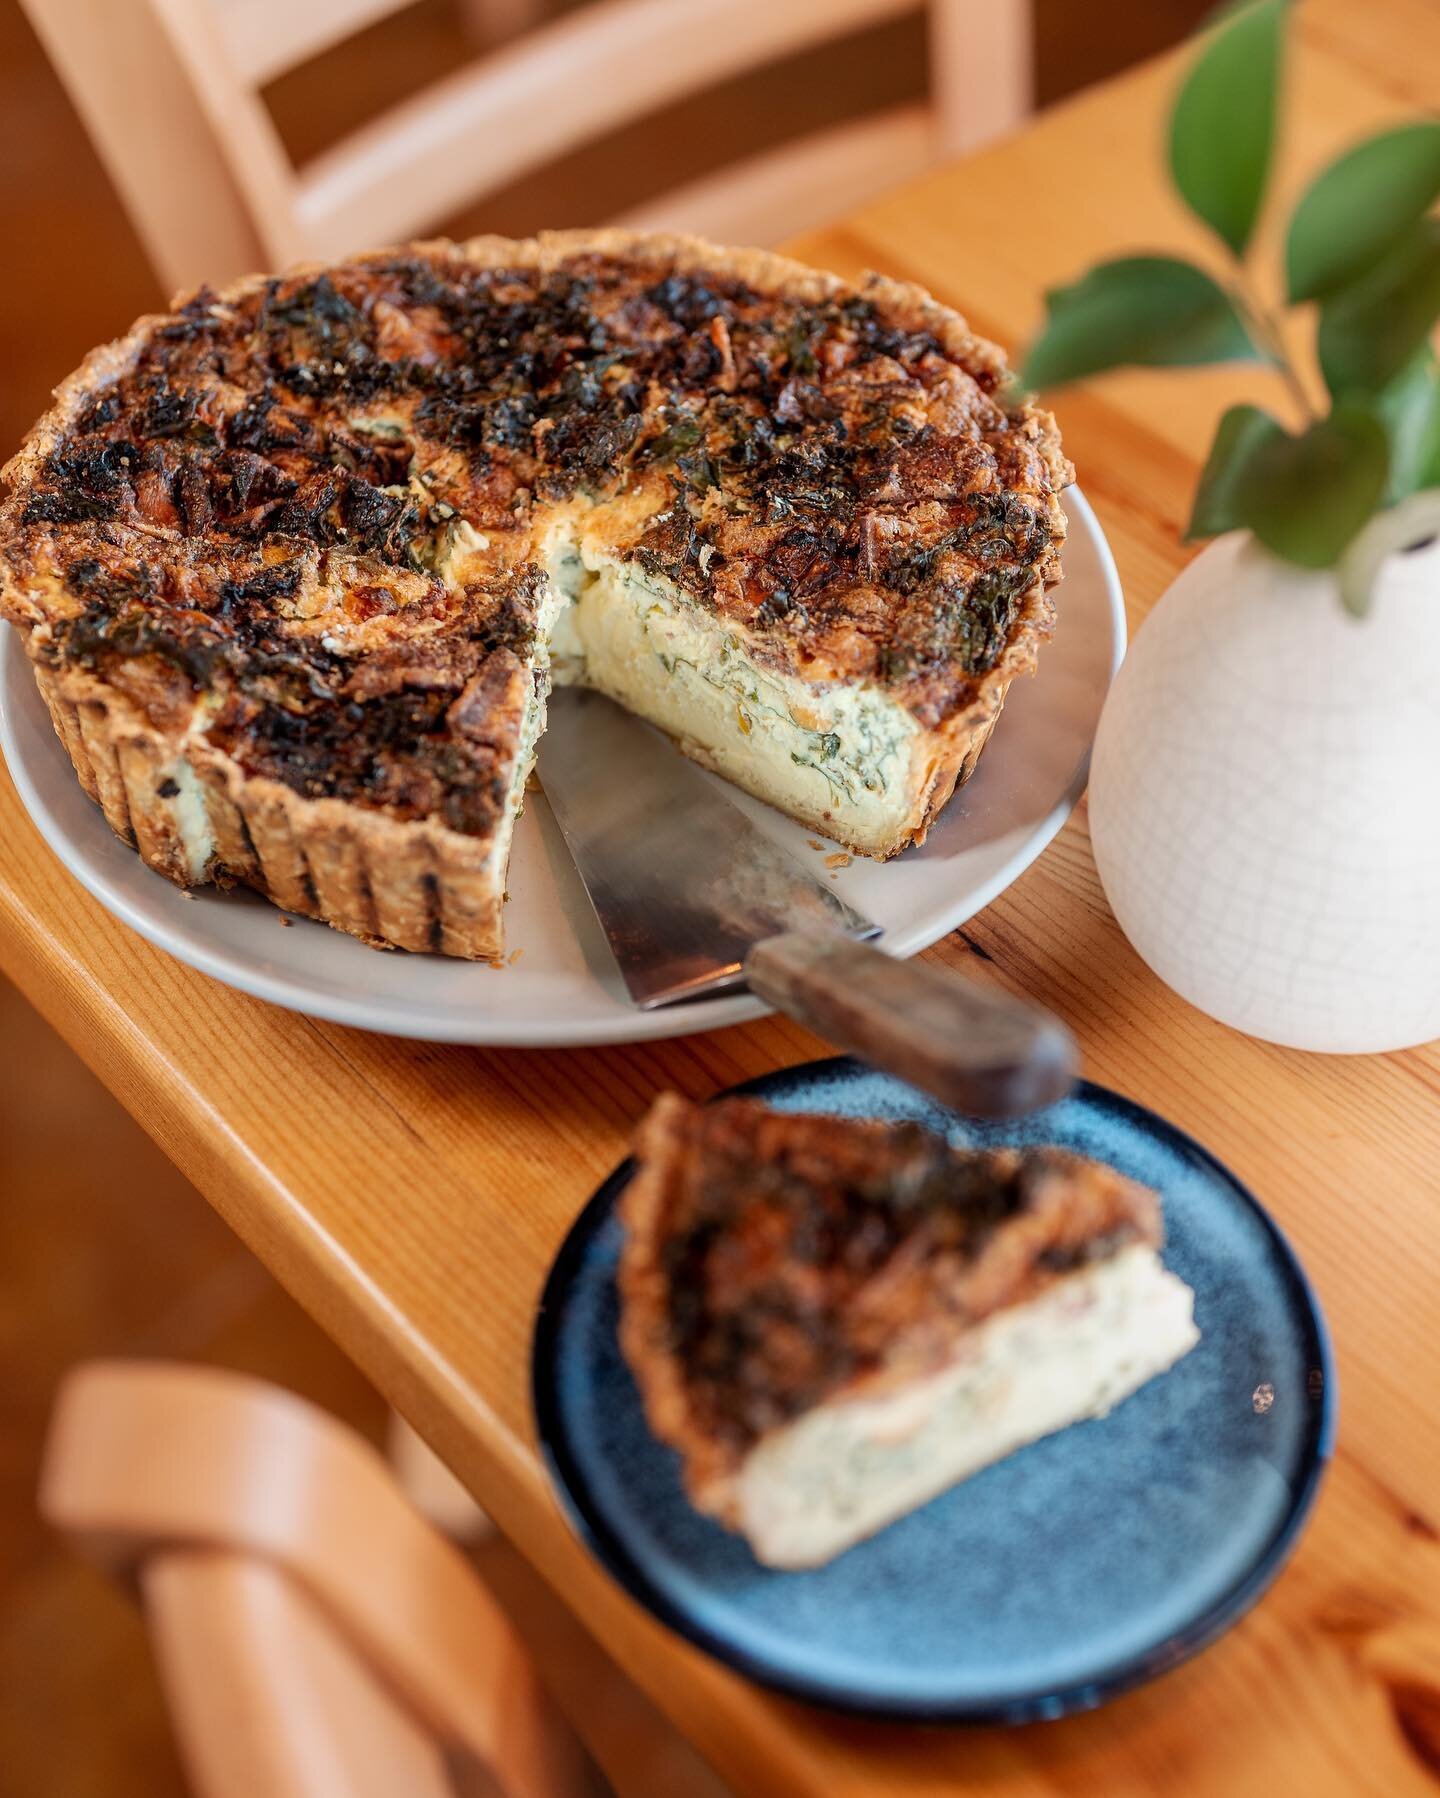 No better way to start the day than with our quiche! We&rsquo;ve been perfecting our quiche recipe, and it&rsquo;s better than ever.

We always have 2 two quiche options available at the counter, our Farm Quiche (vegetarian) and our Seasonal Quiche!
